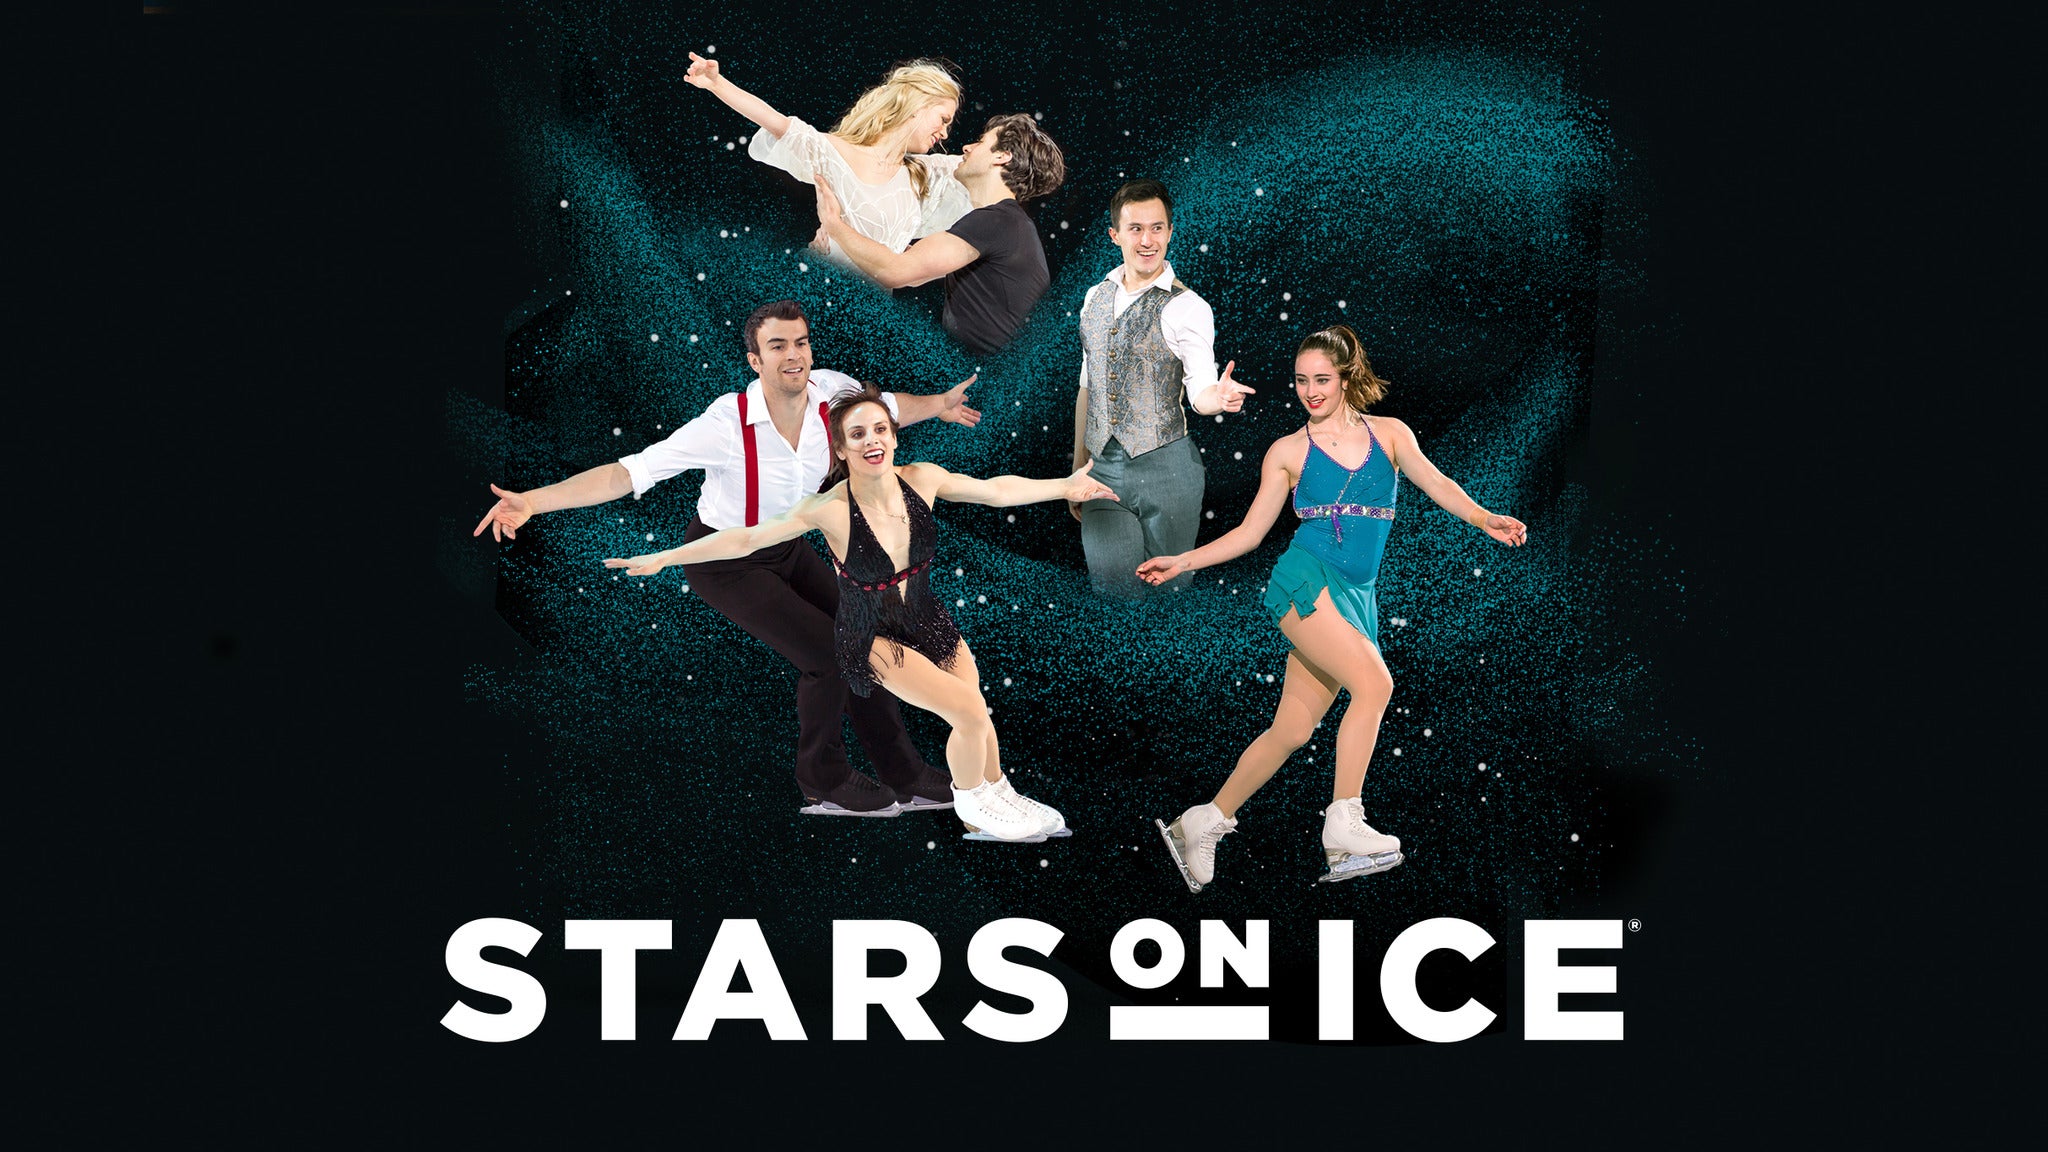 Stars on Ice - Canada in Winnipeg promo photo for Special presale offer code